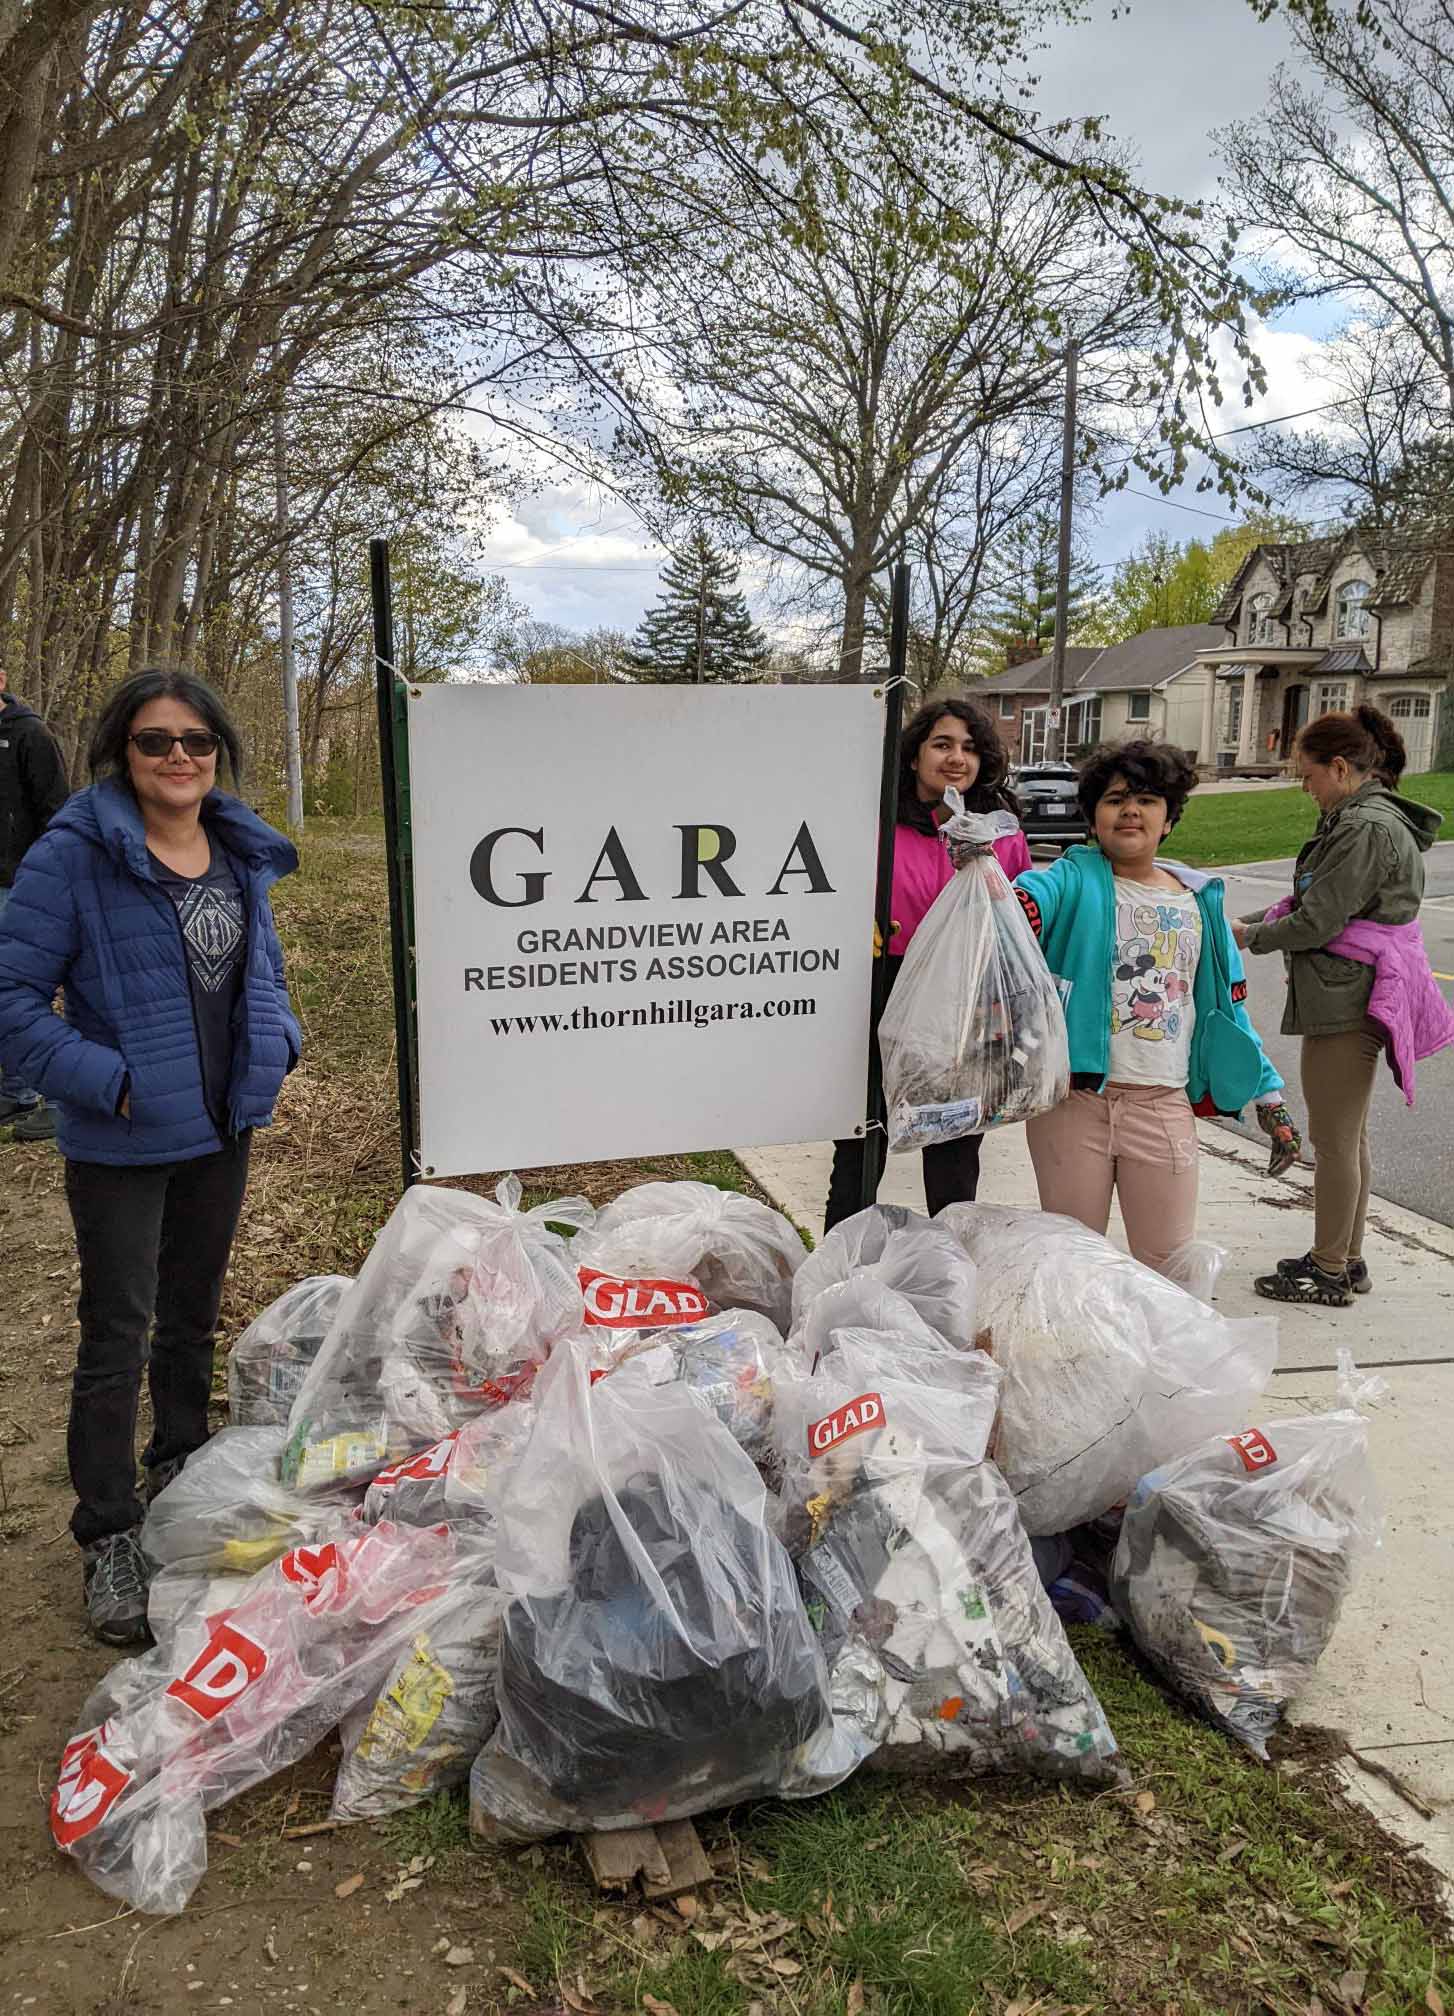 Garbage collected during cleanup with a family who helped